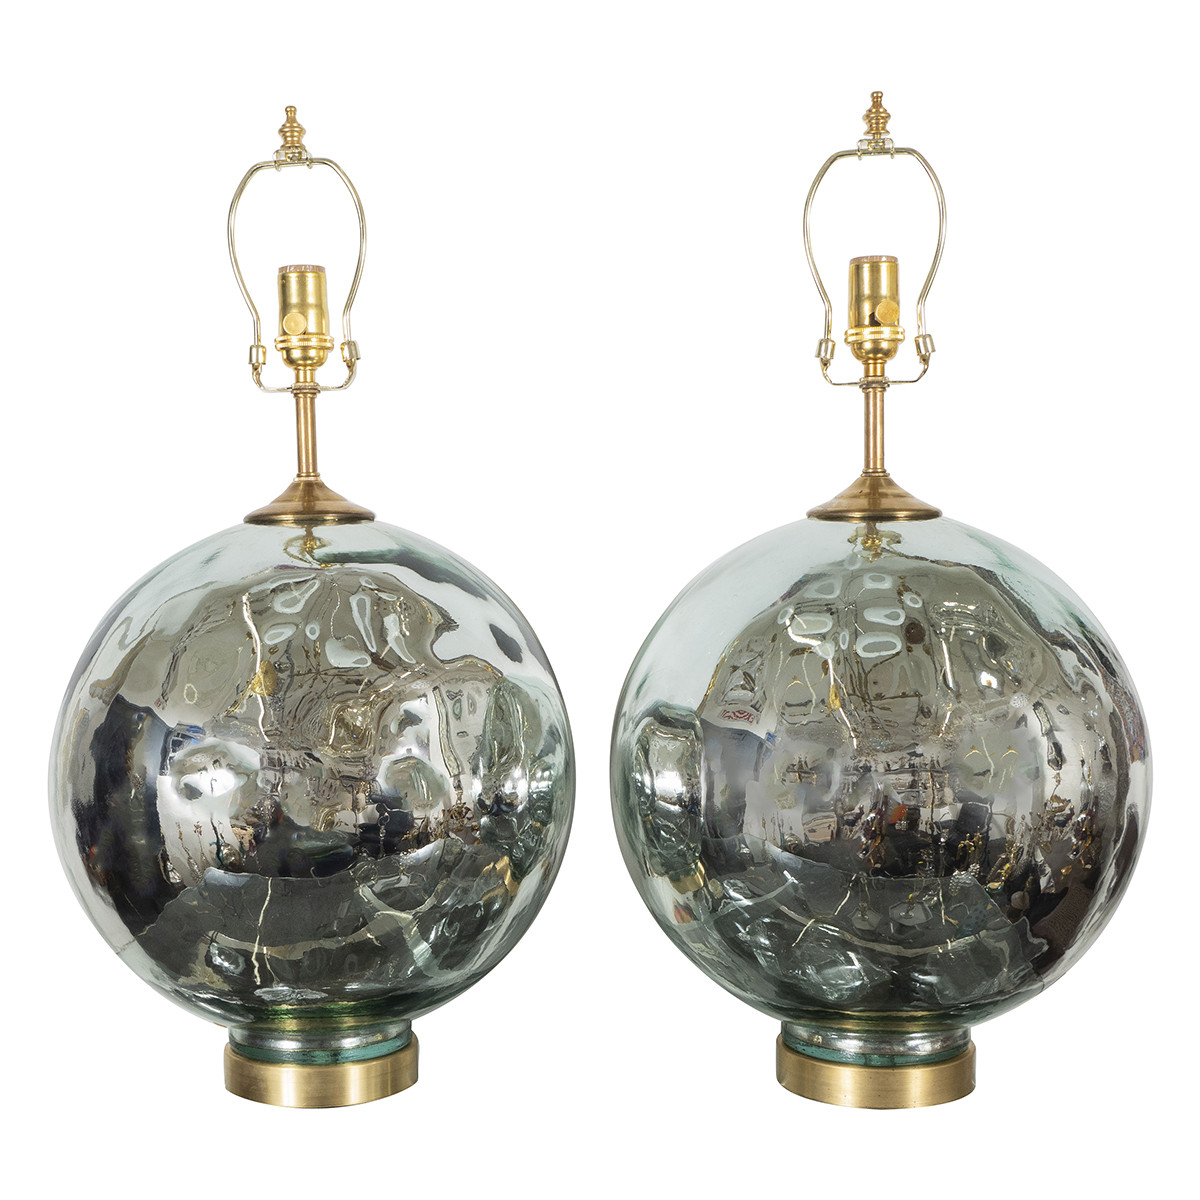 Pair of blue-tinted spherical mercury glass lamps